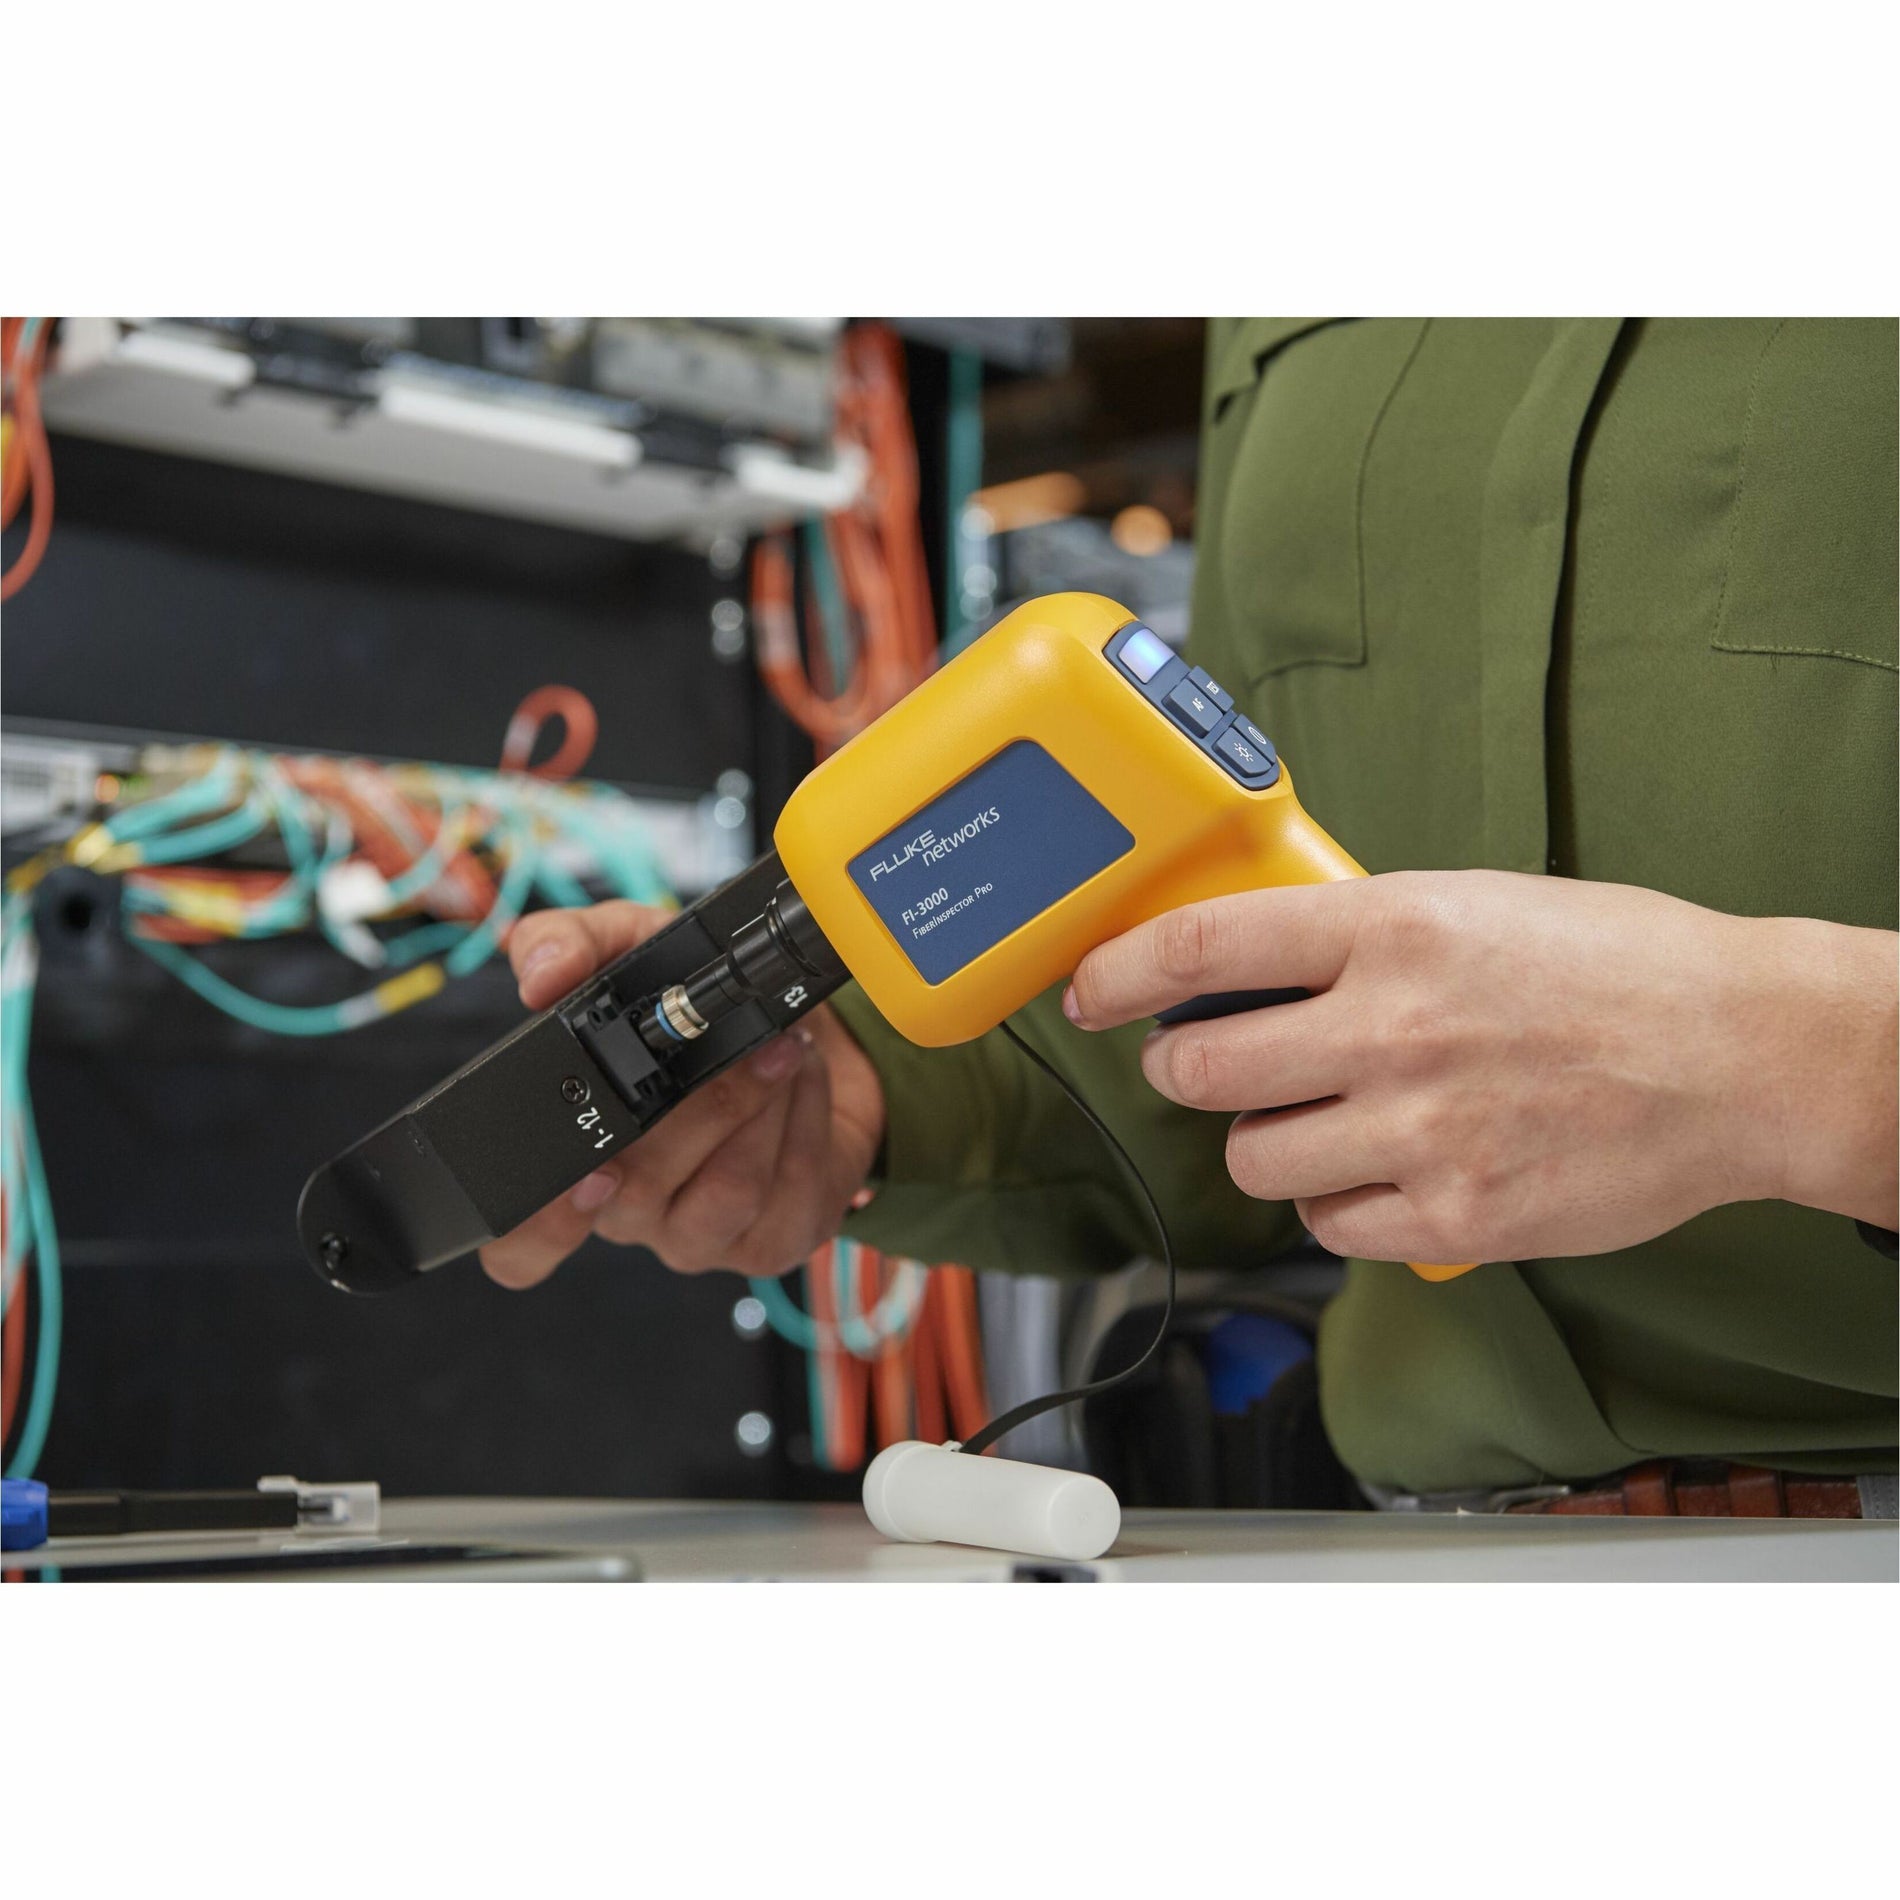 Fluke Networks FI2-7300 FiberInspector Pro Cable Analyzer, Fiber Optic and Twisted Pair Testing, USB and Wireless LAN